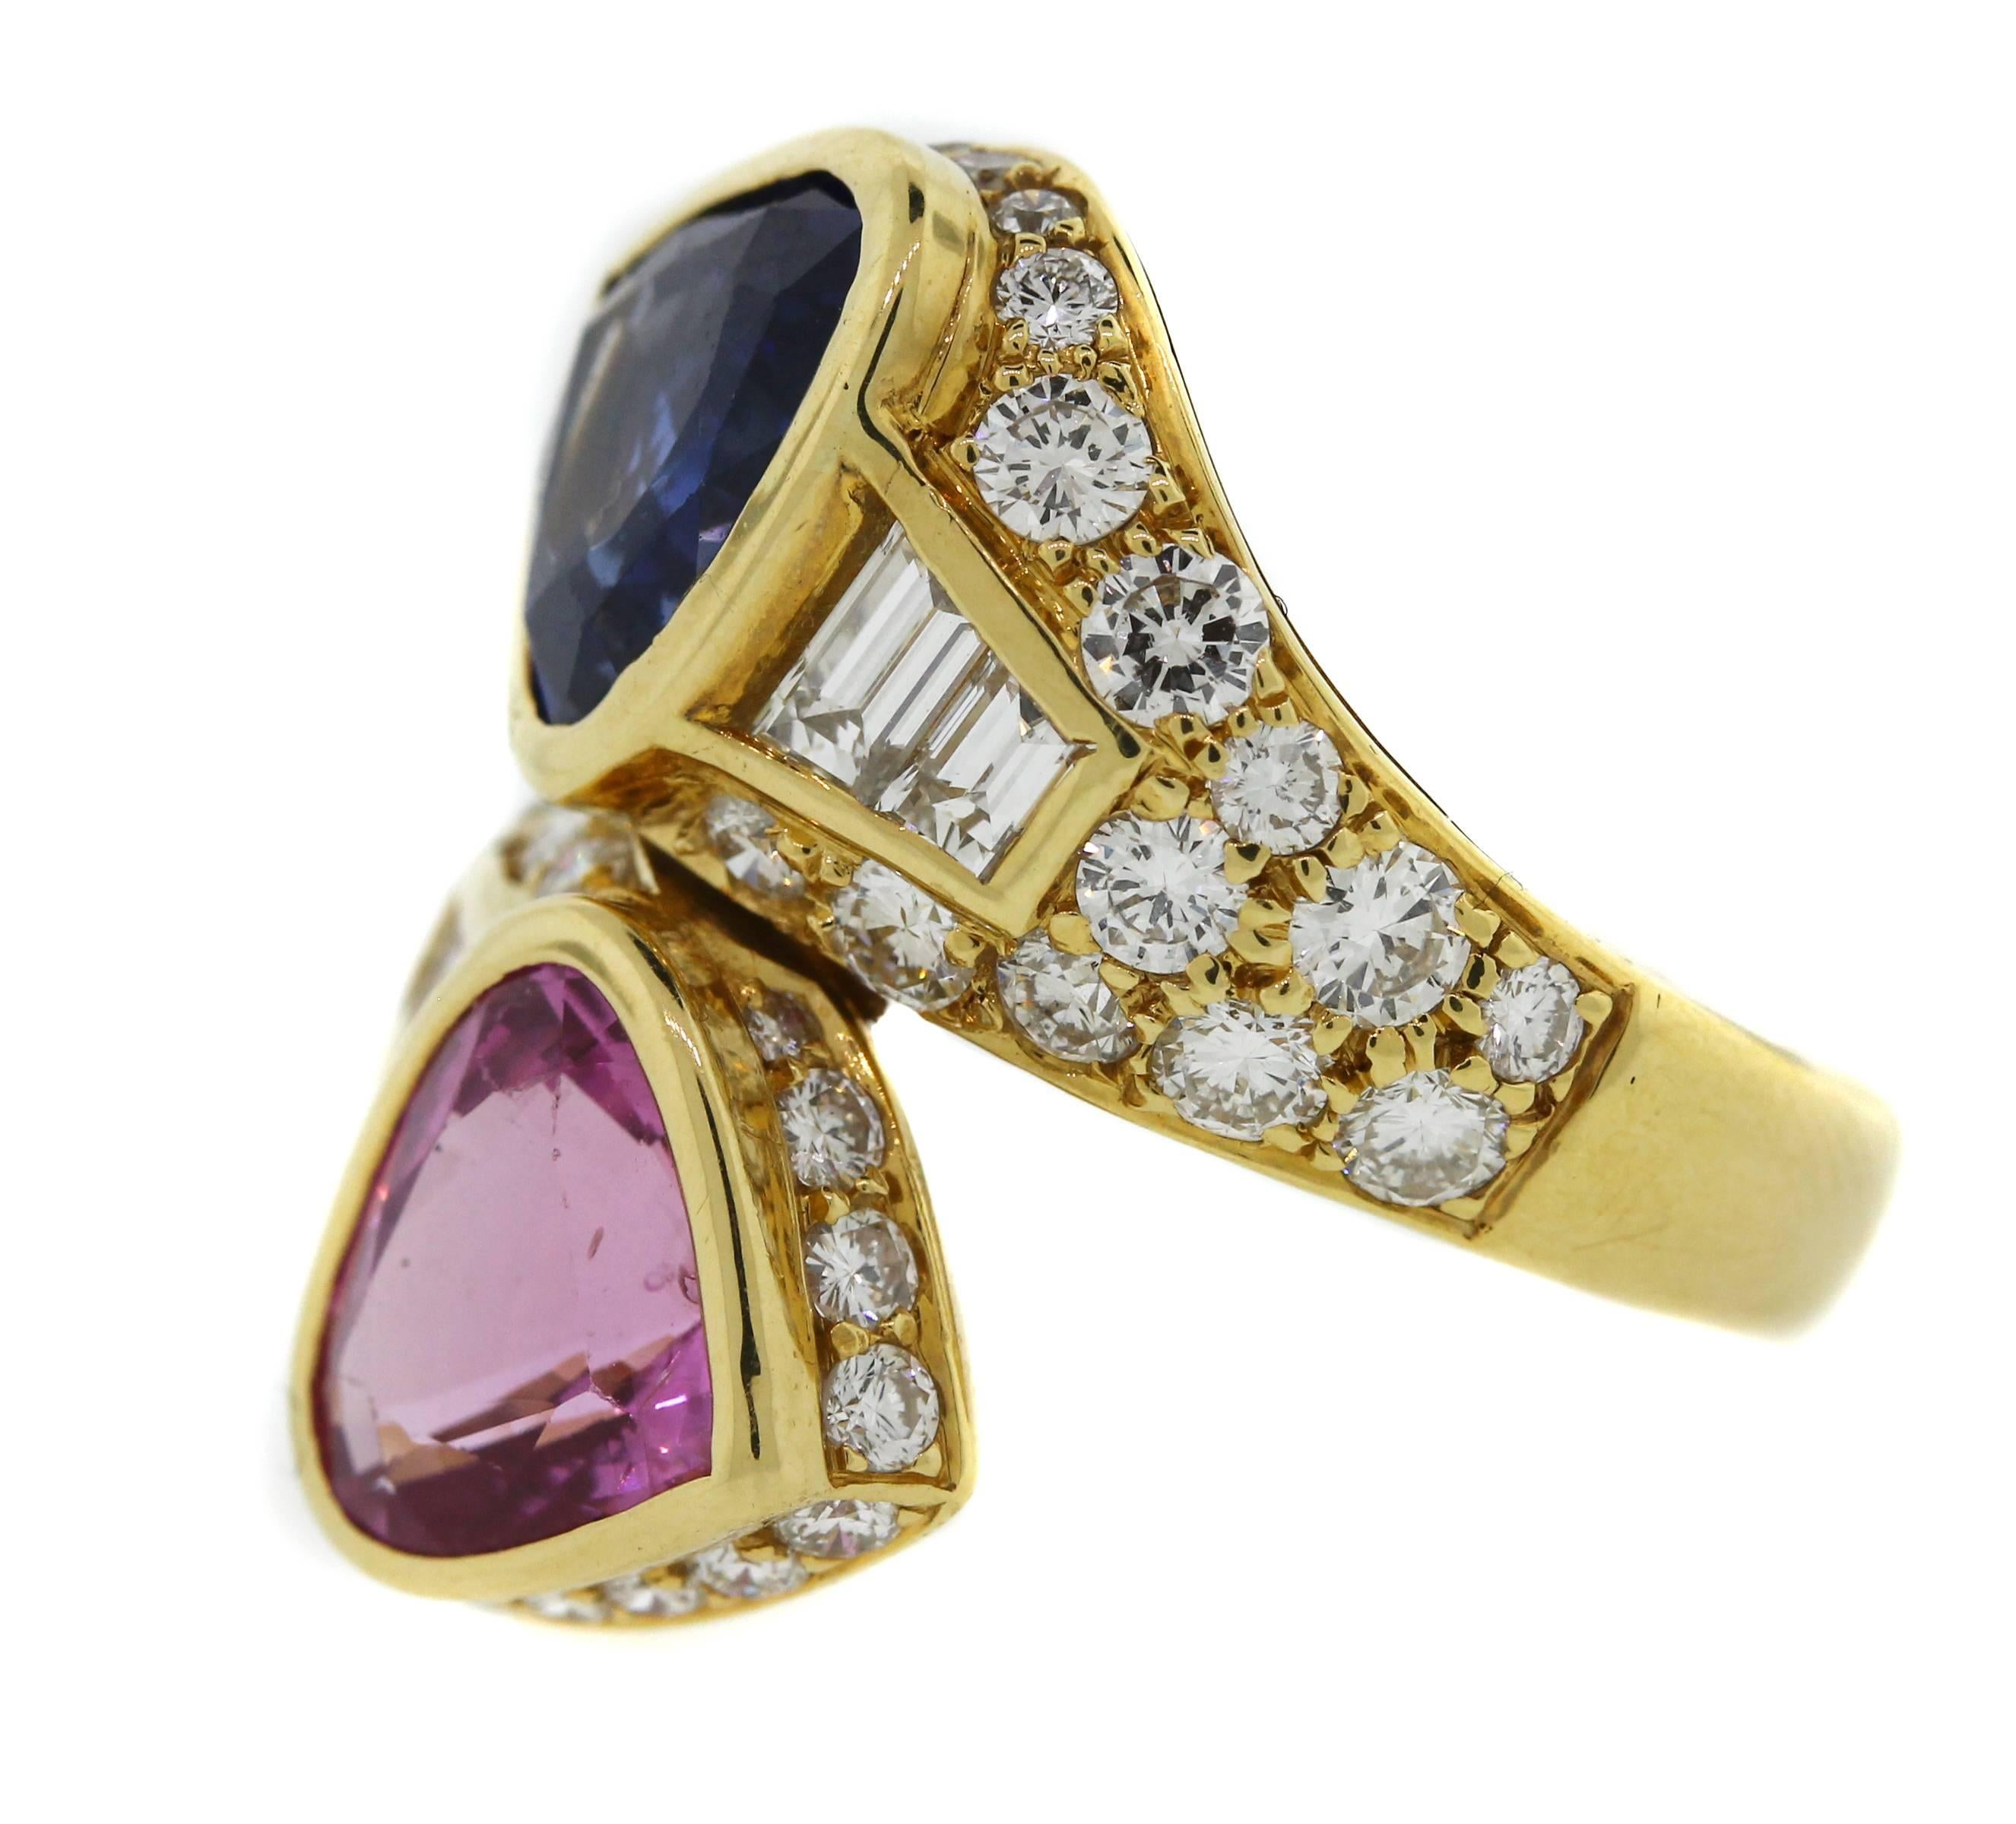 18K Yellow Gold Ring with Pink and Blue Heart Shaped Sapphires and DIamonds

Sapphires are from Sri Lanka.

2.50ct. apprx. White Diamonds

Currently size 7. Can be sized

GIA Certificate in photos. 
